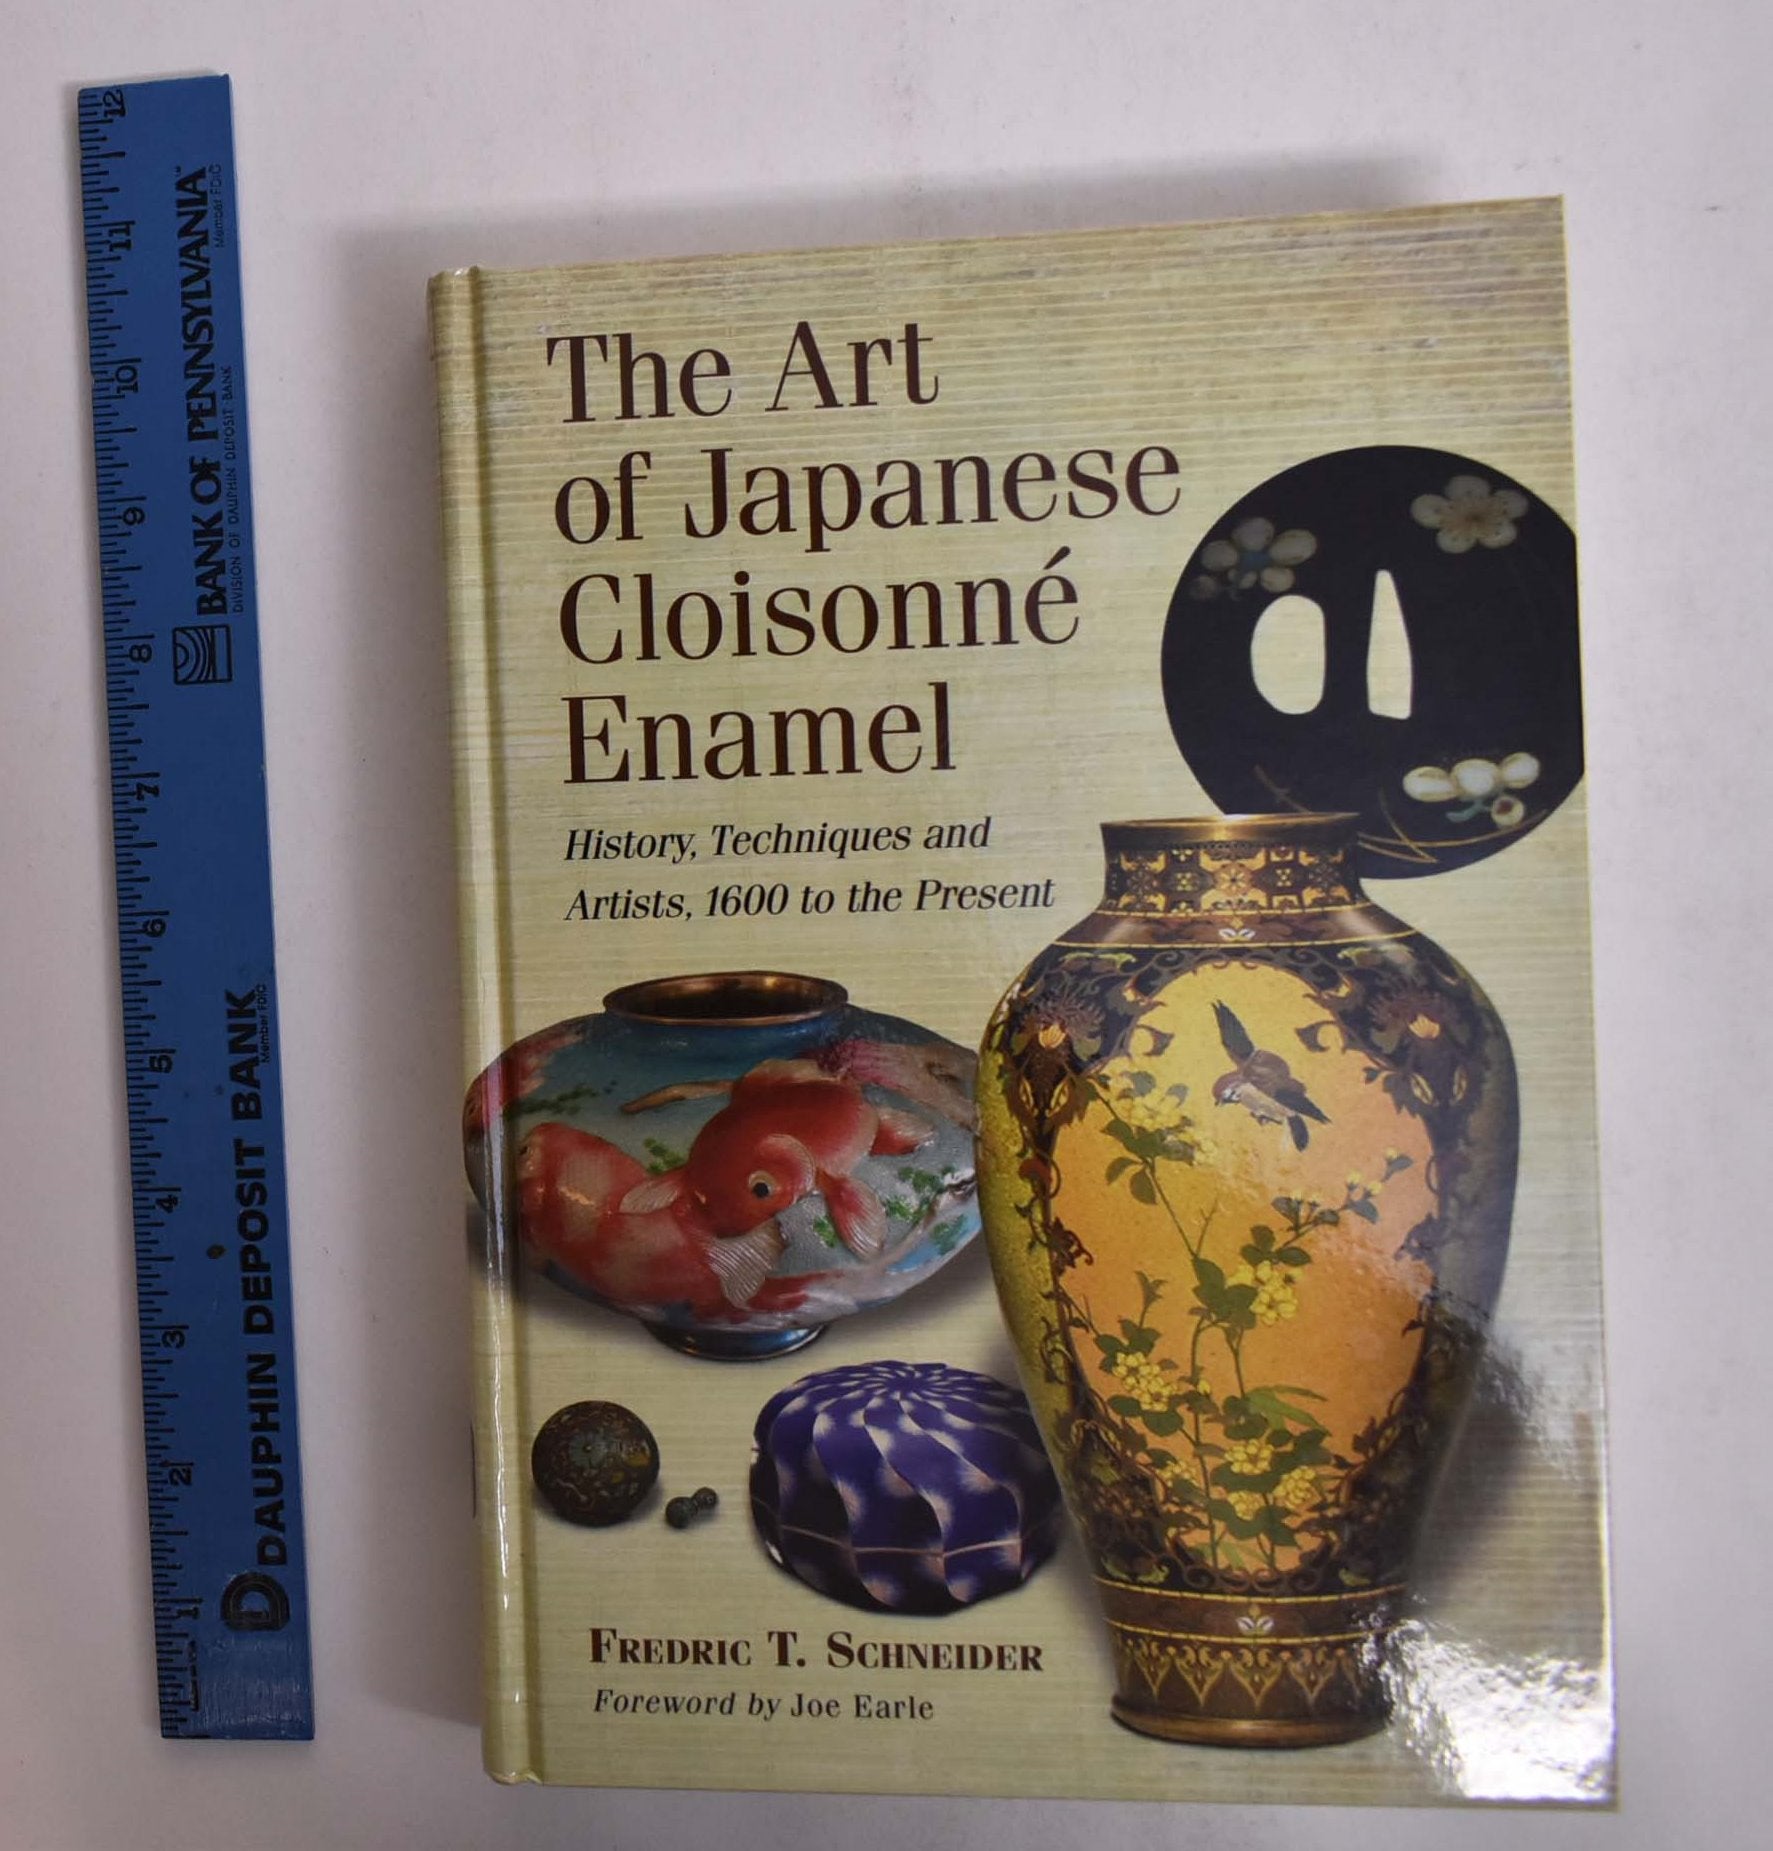 The Art of Japanese Cloisonne Enamel: History, Techniques and